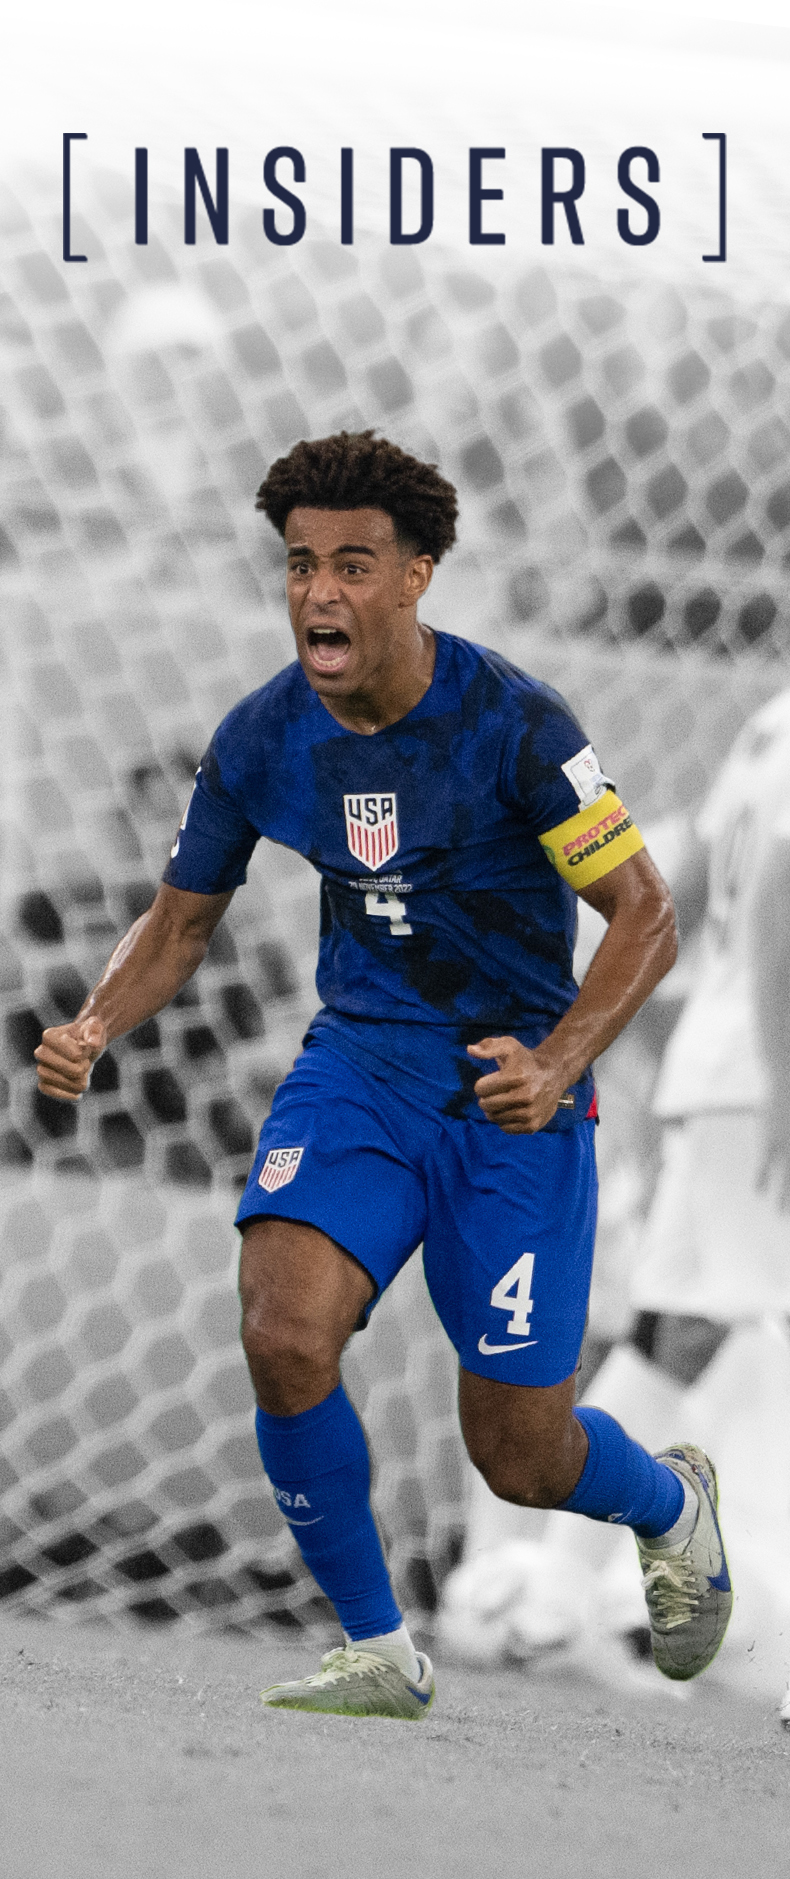 United States soccer heroes' jerseys